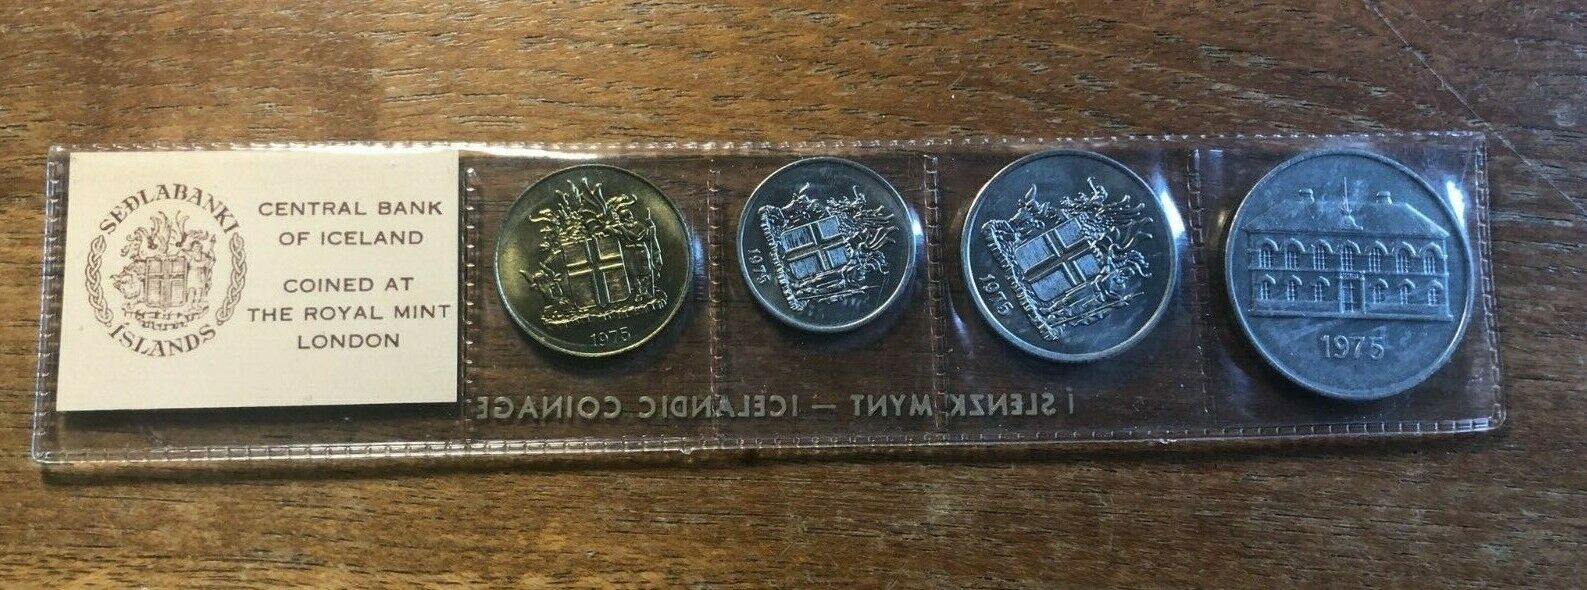 Bank Of Iceland 1975 Mint Set Nice Conditon And Strike Z77